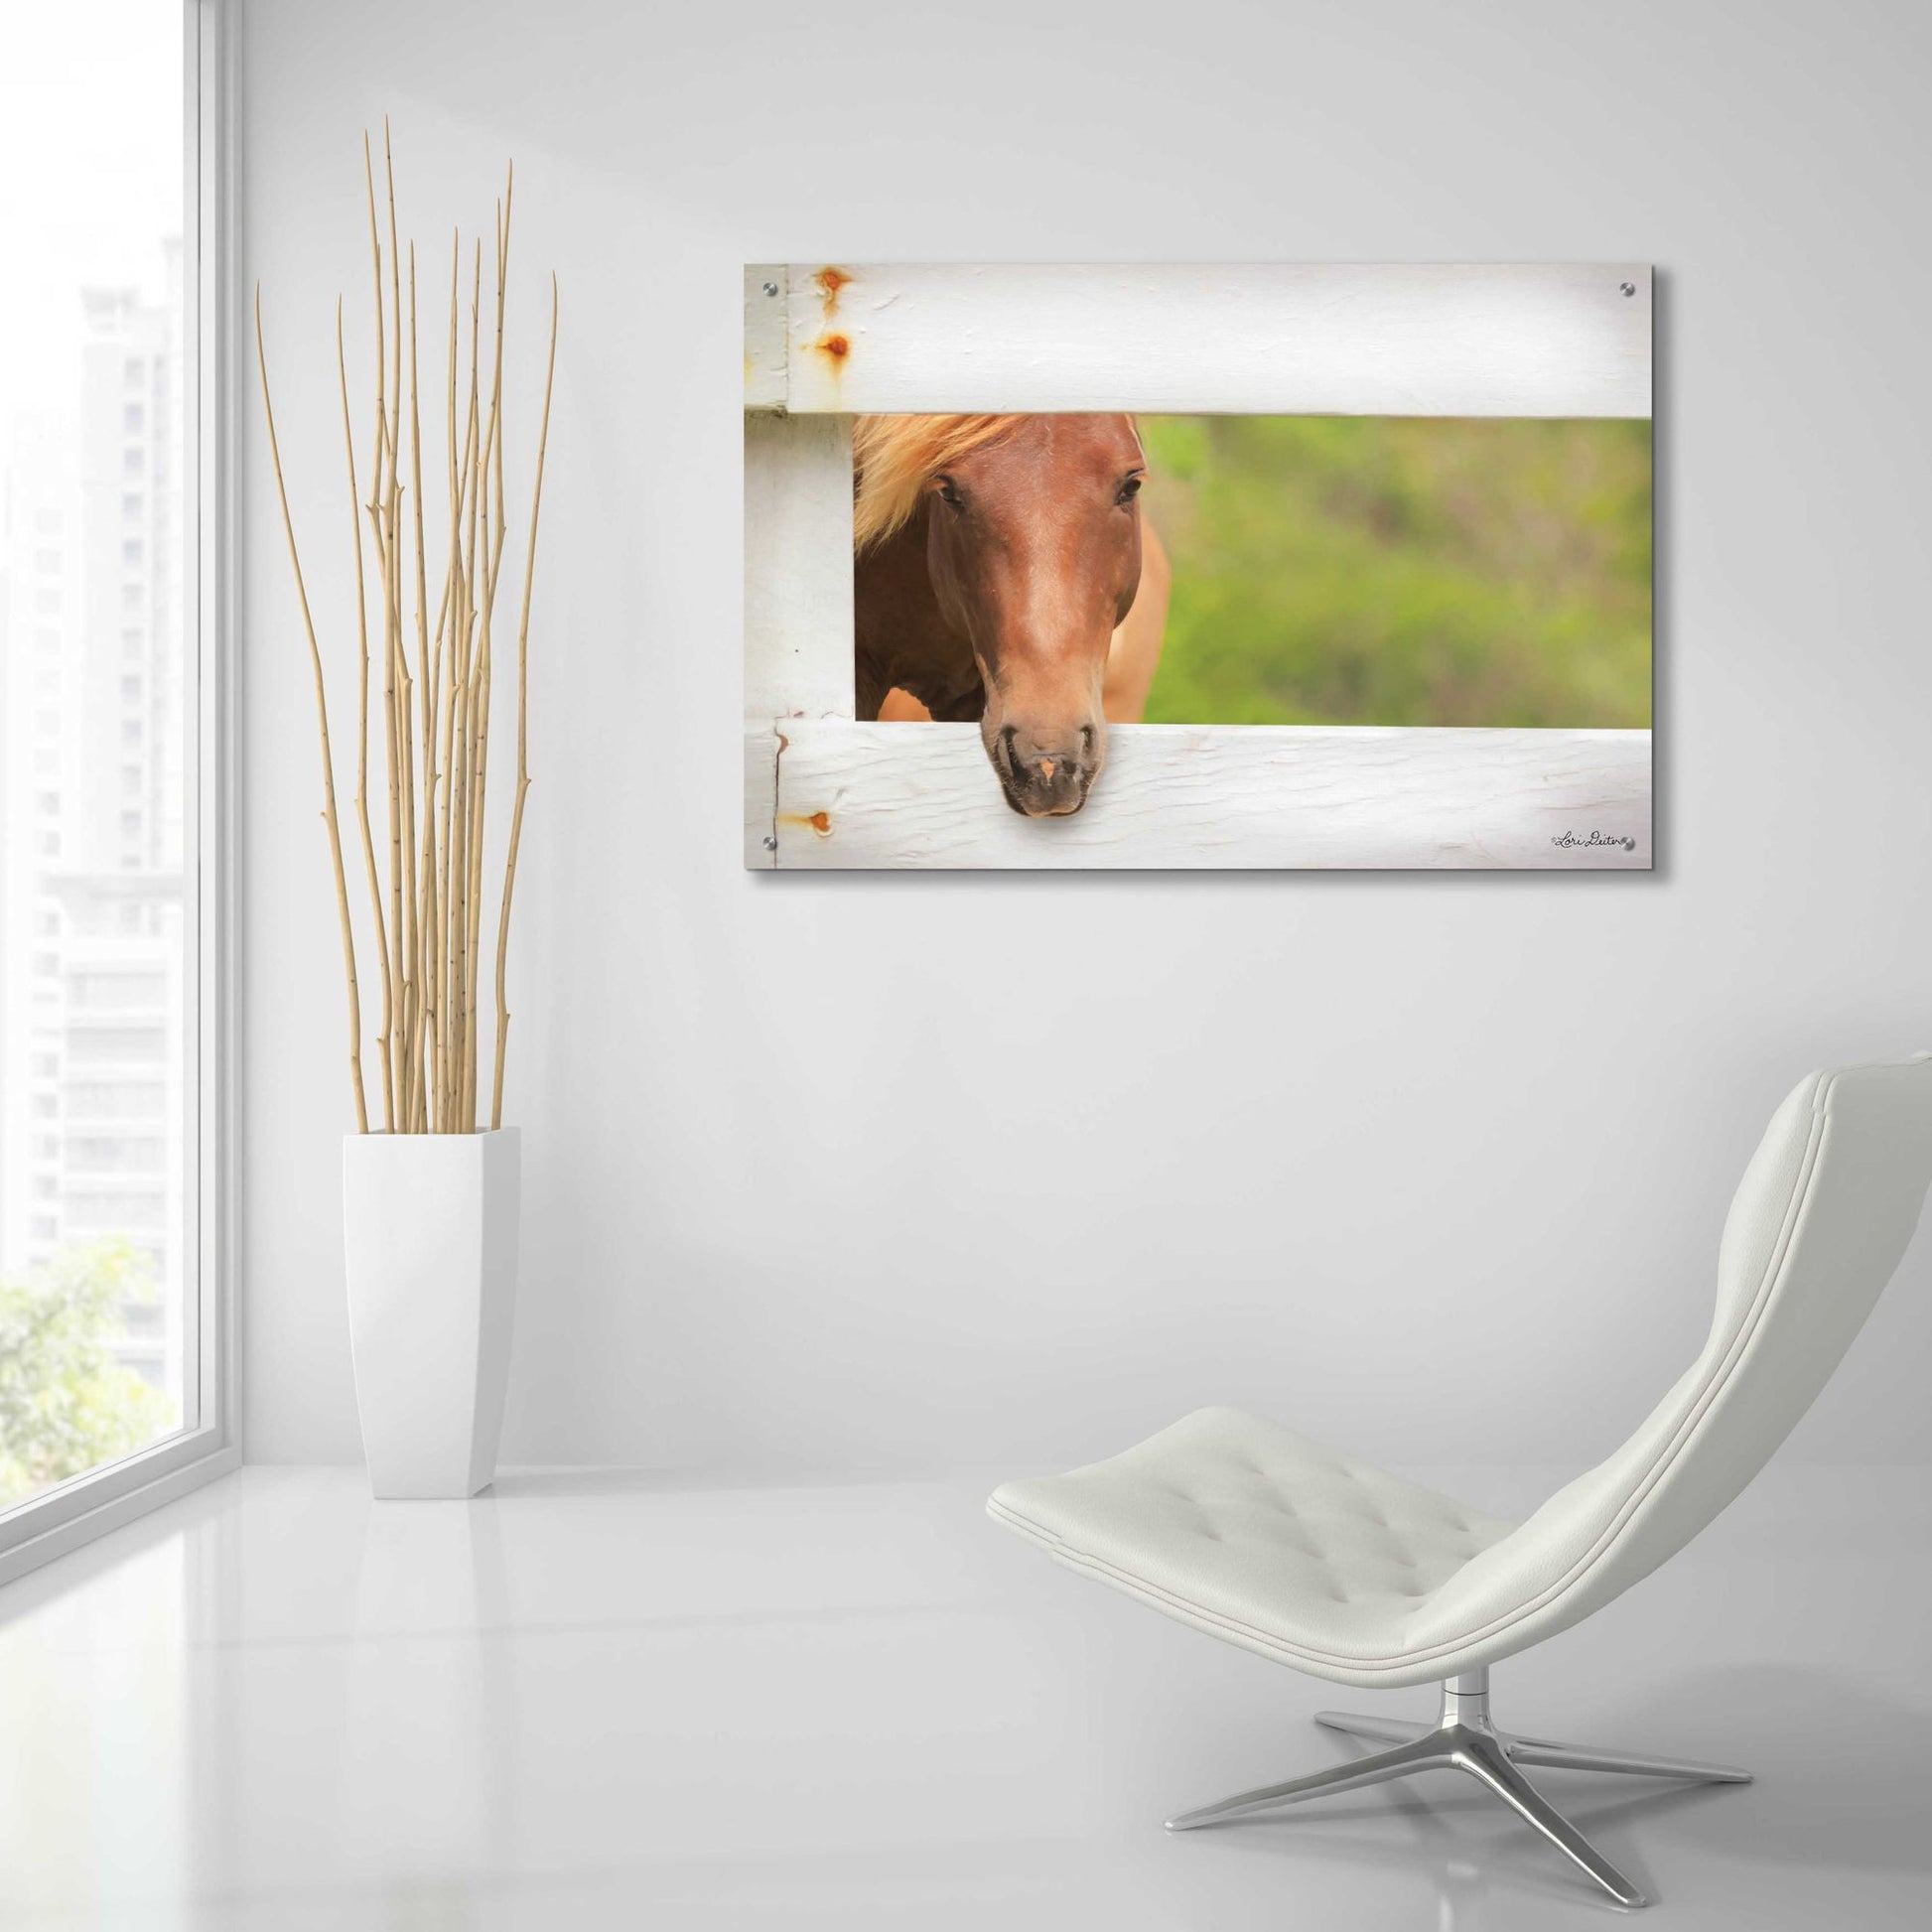 Epic Art 'Horse at Fence' by Lori Deiter Acrylic Glass Wall Art,36x24